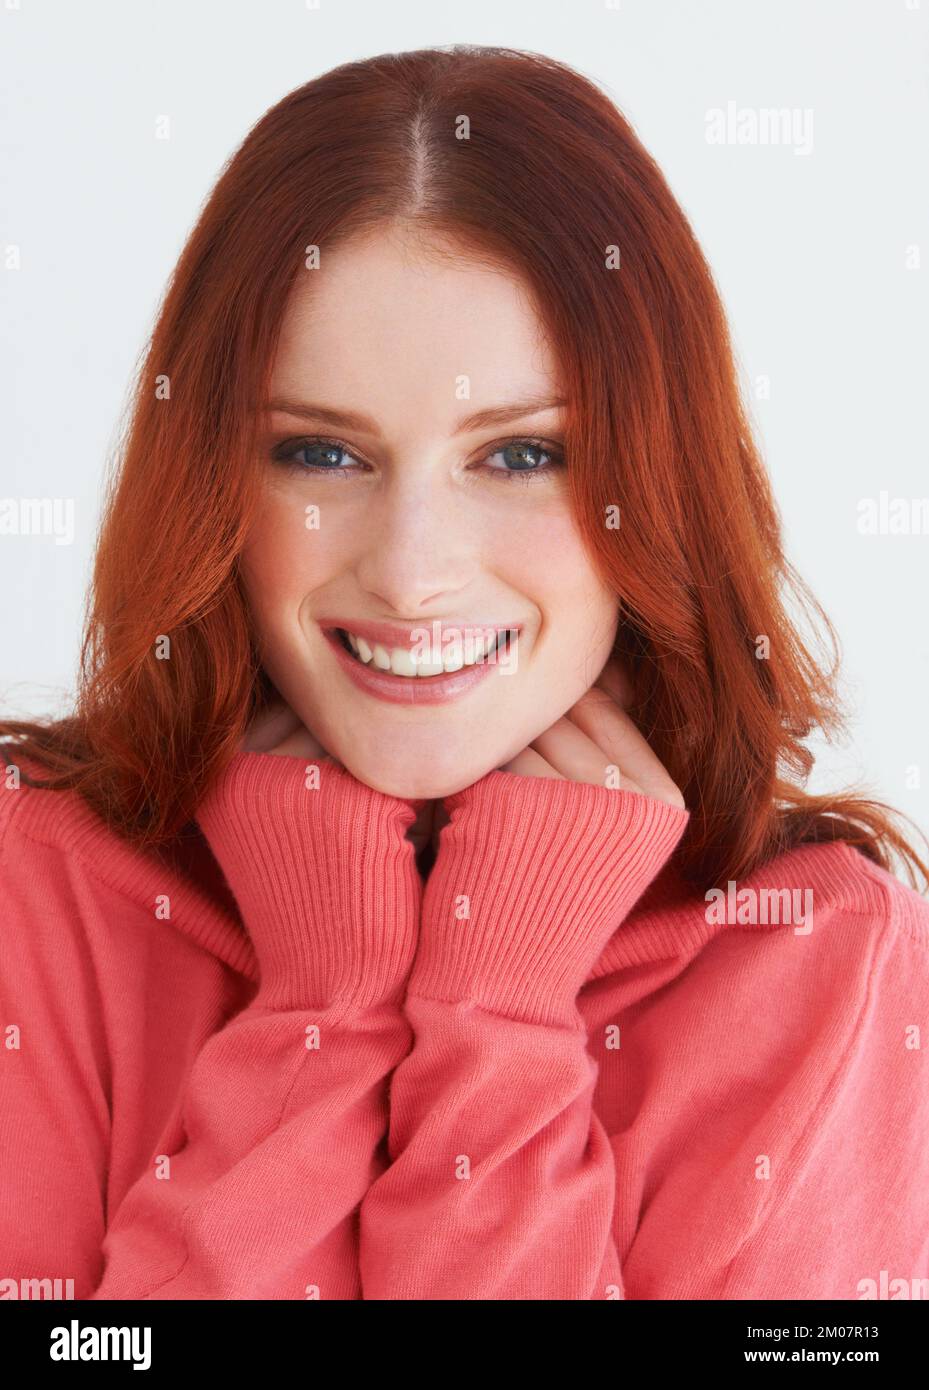 Im ready for a bright winter. Portrait of a young woman in a bright sweater. Stock Photo